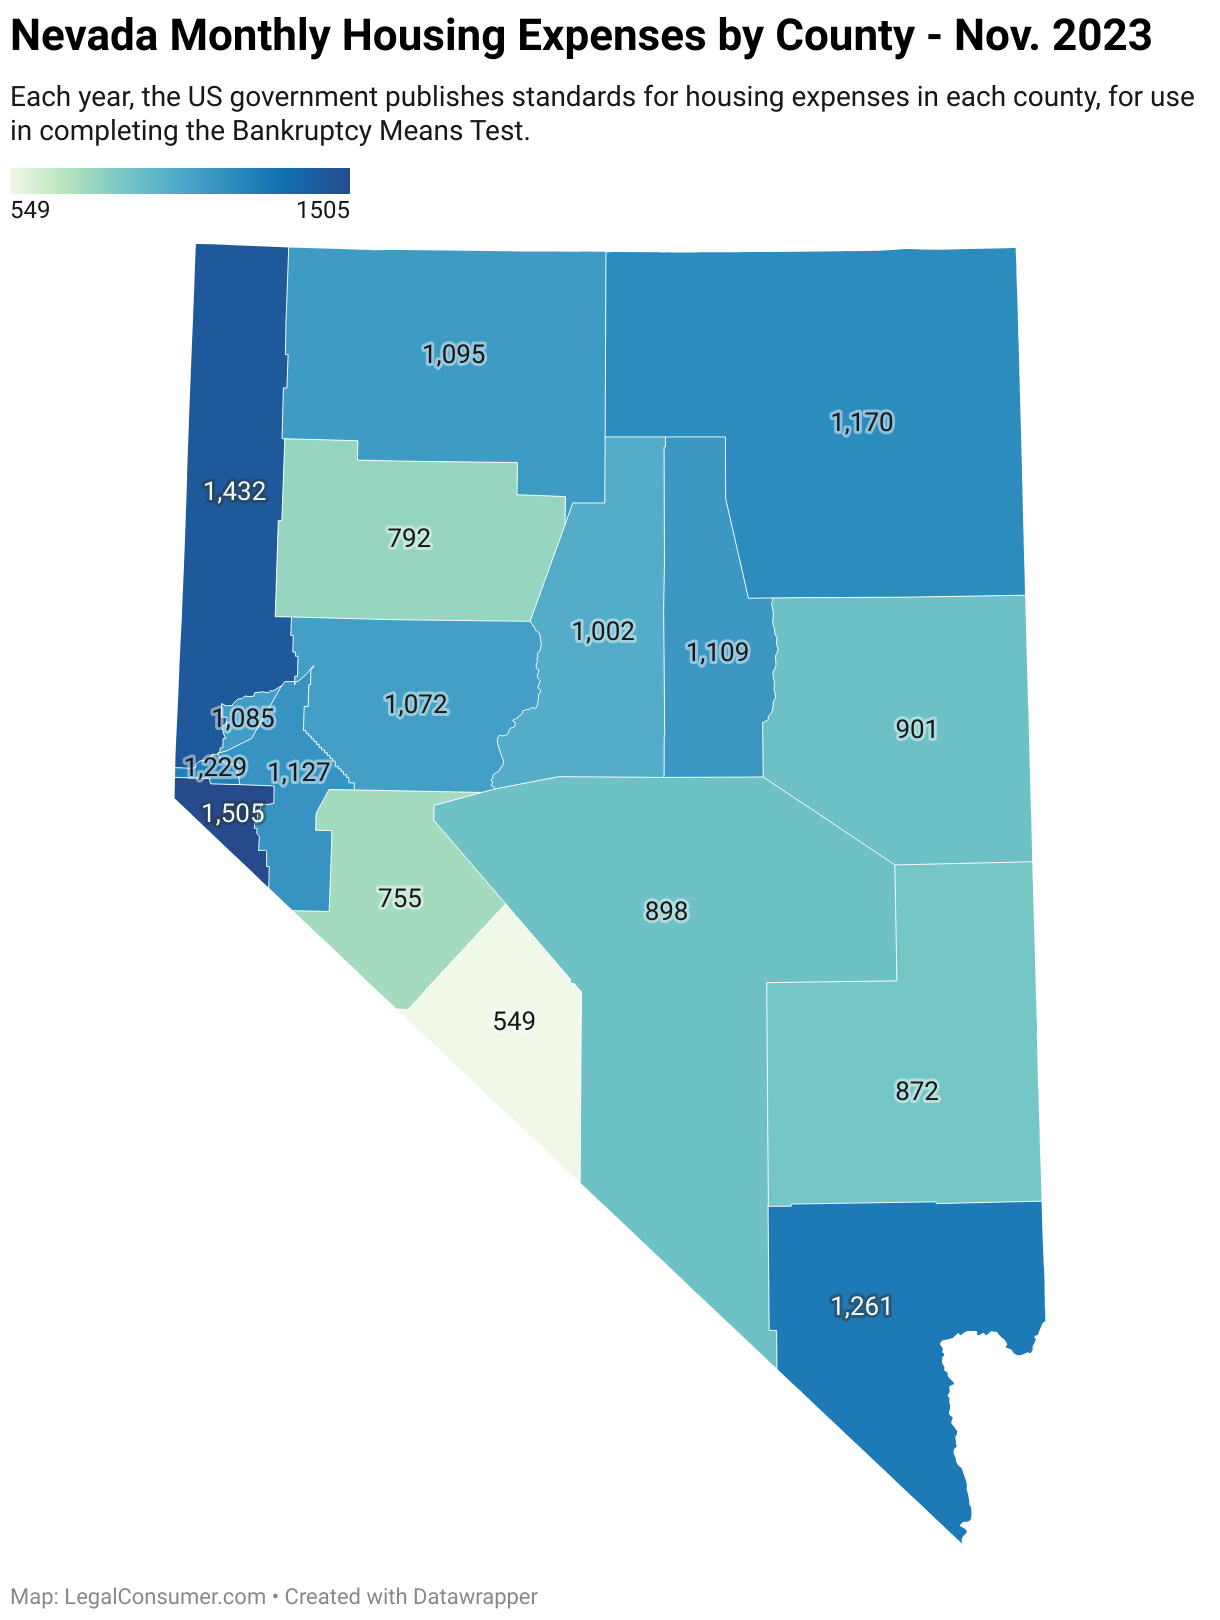 Map of Nevada Housing Expenses for Bankruptcy Means Test